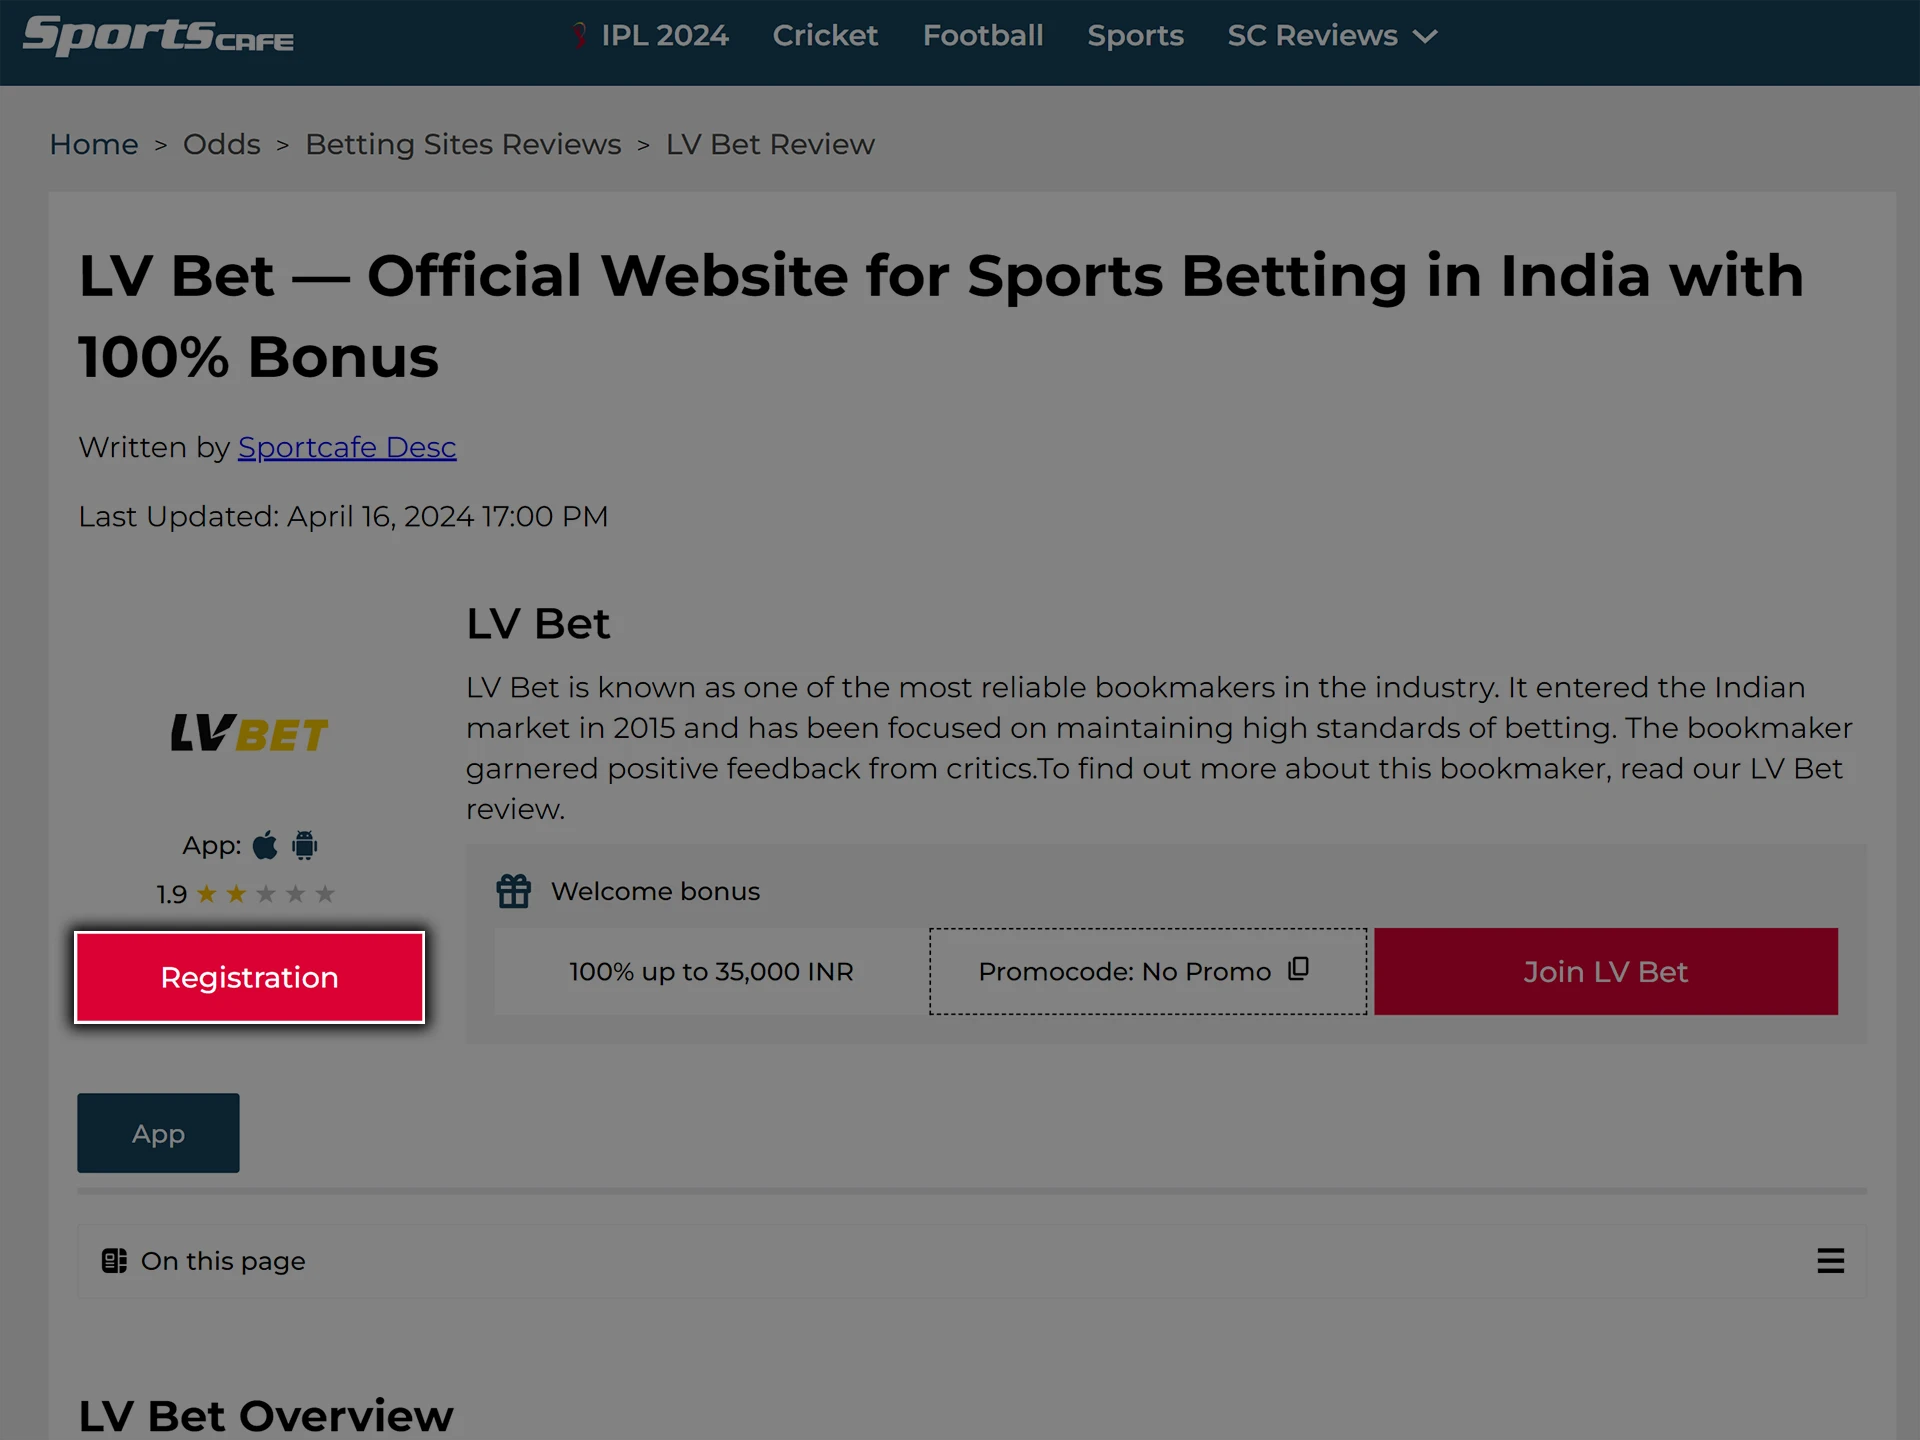 Use the link to open the LV Bet website.